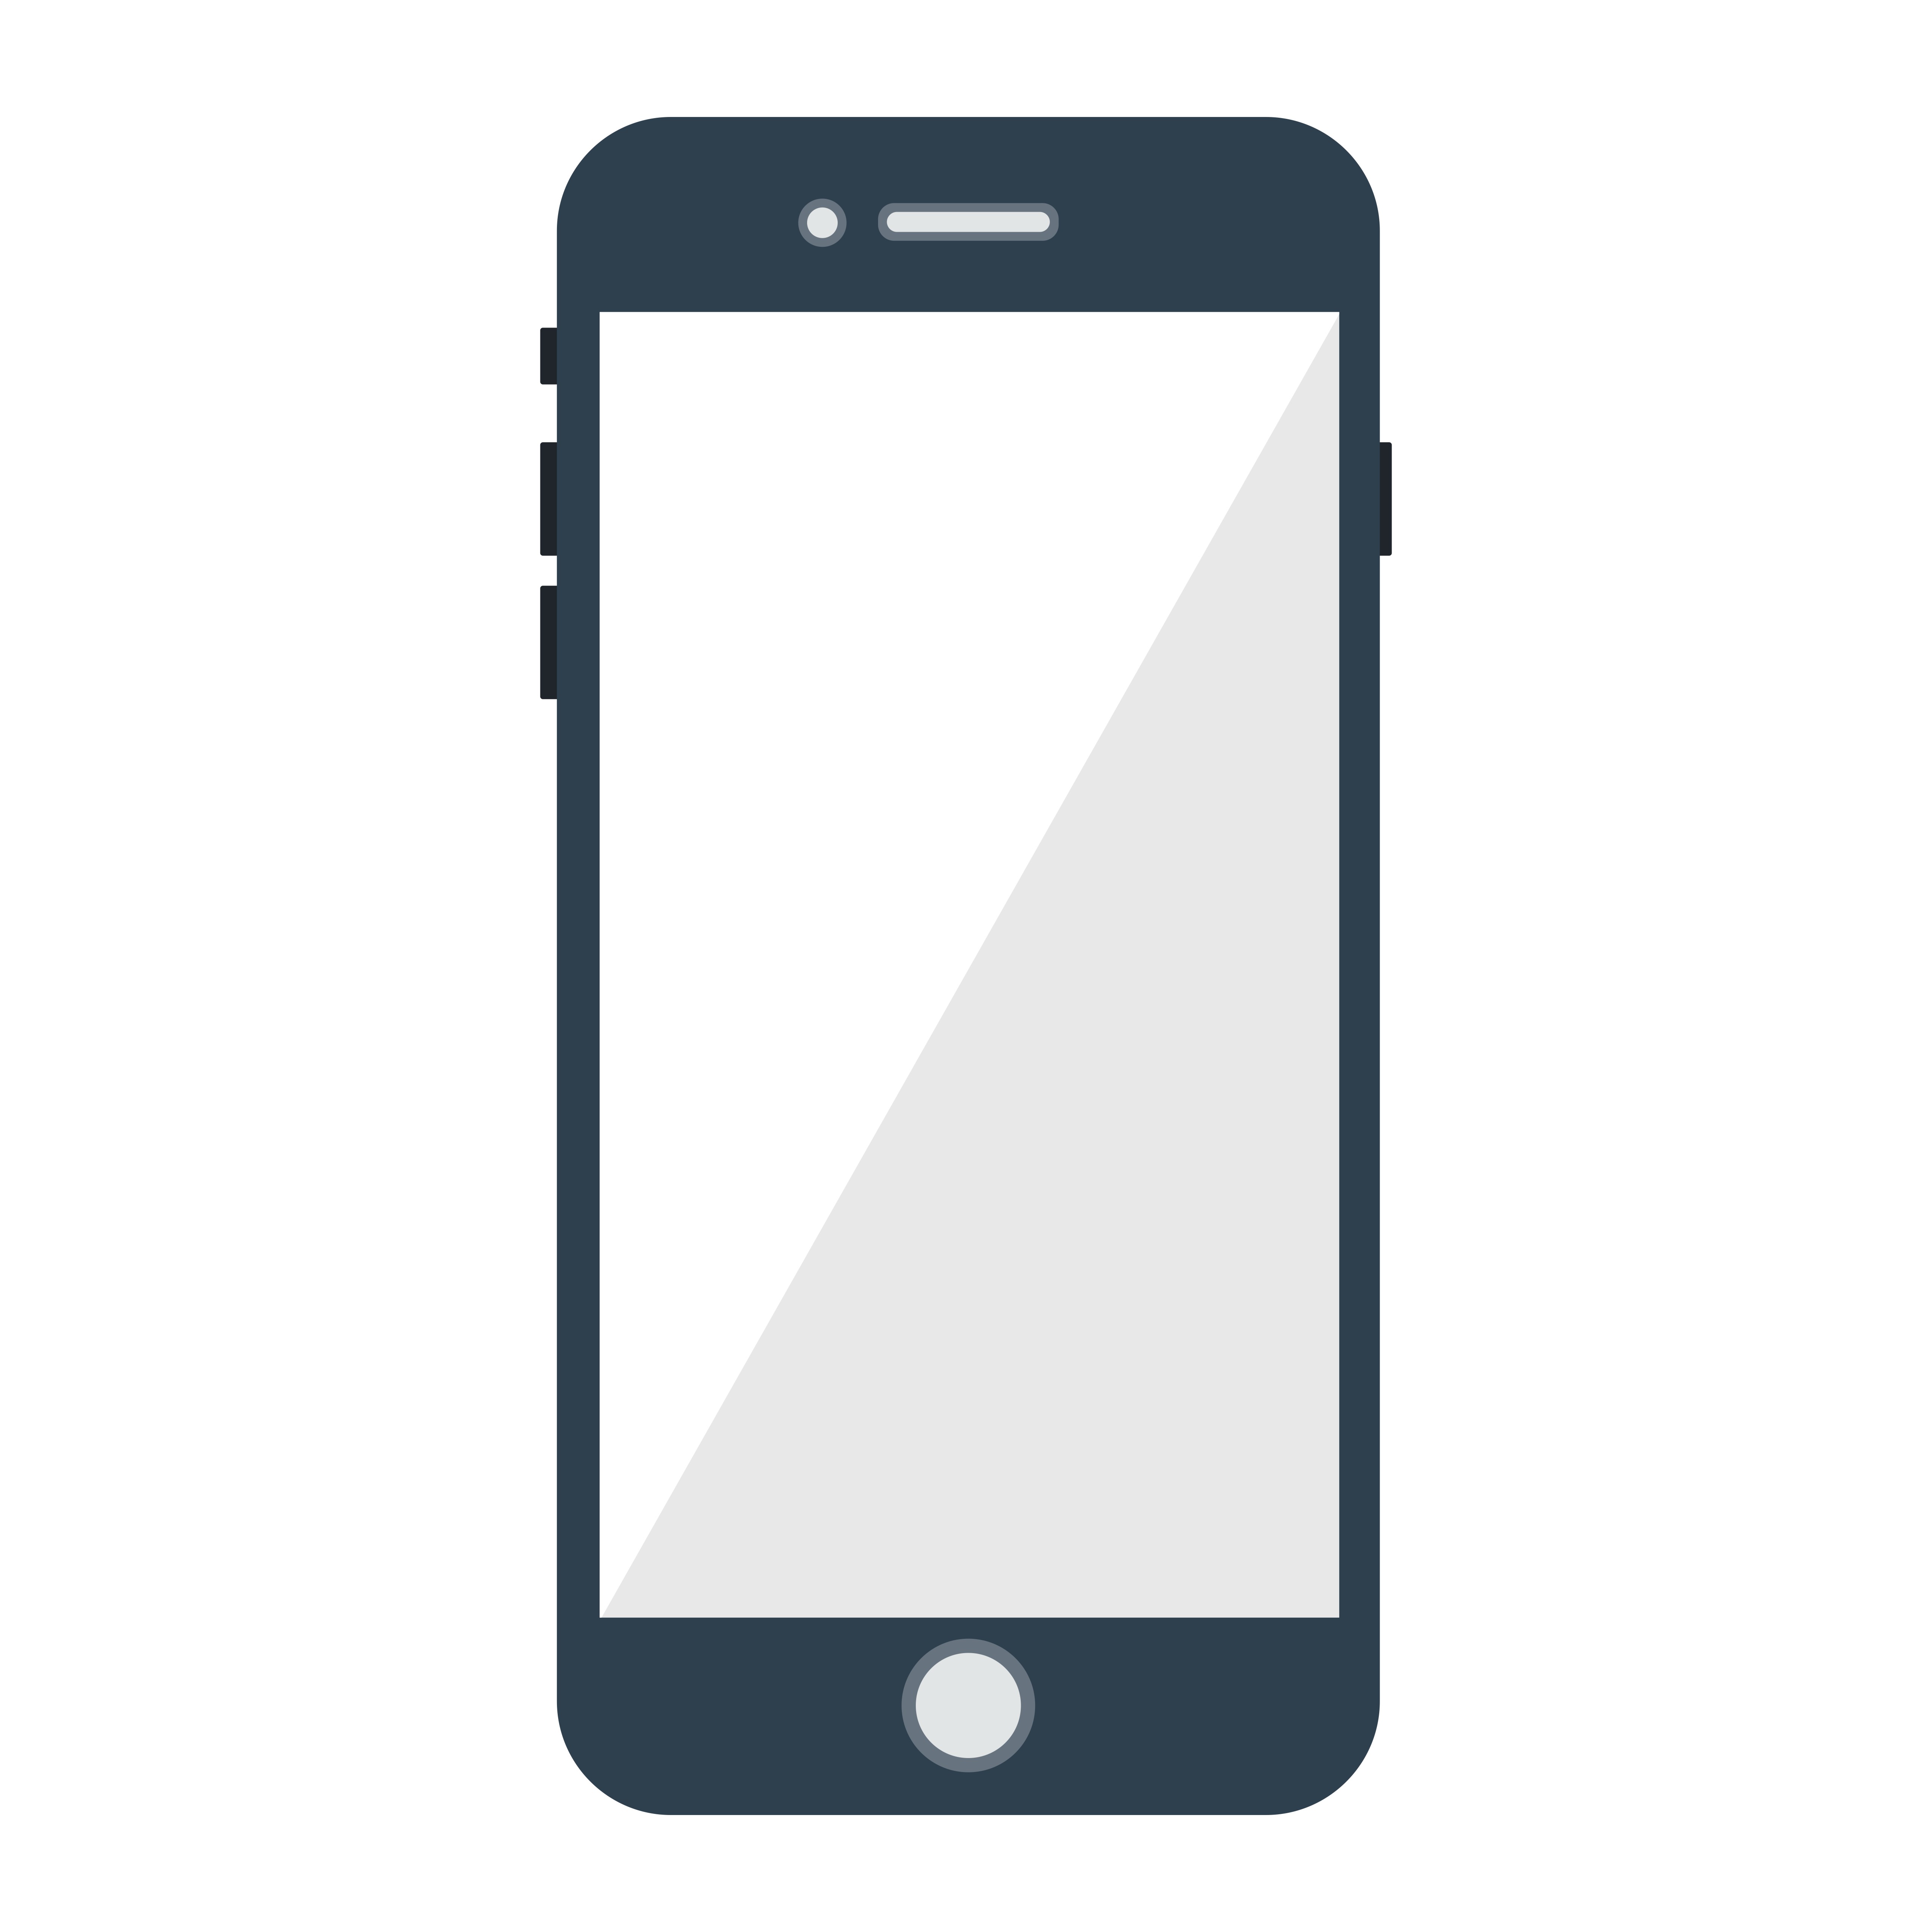 Download Cell Phone Vector Icon - Download Free Vectors, Clipart ...